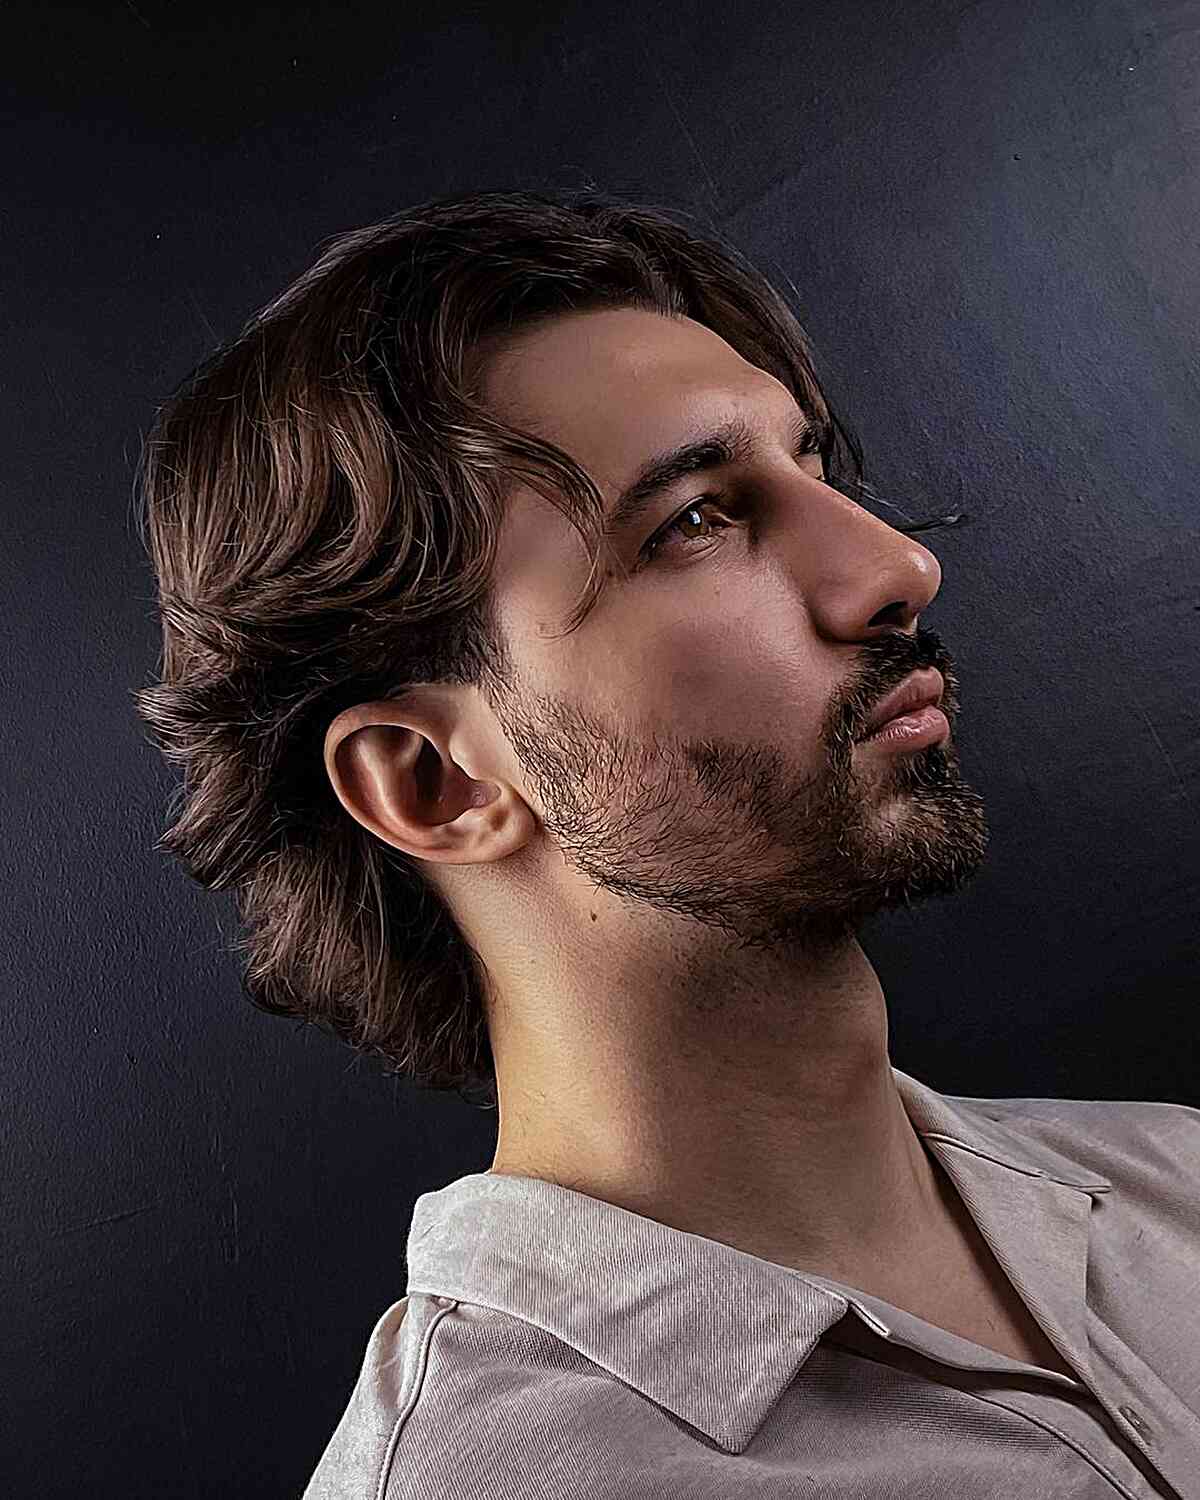 Medium Length Haircuts For Men in 2023 (With Pictures)